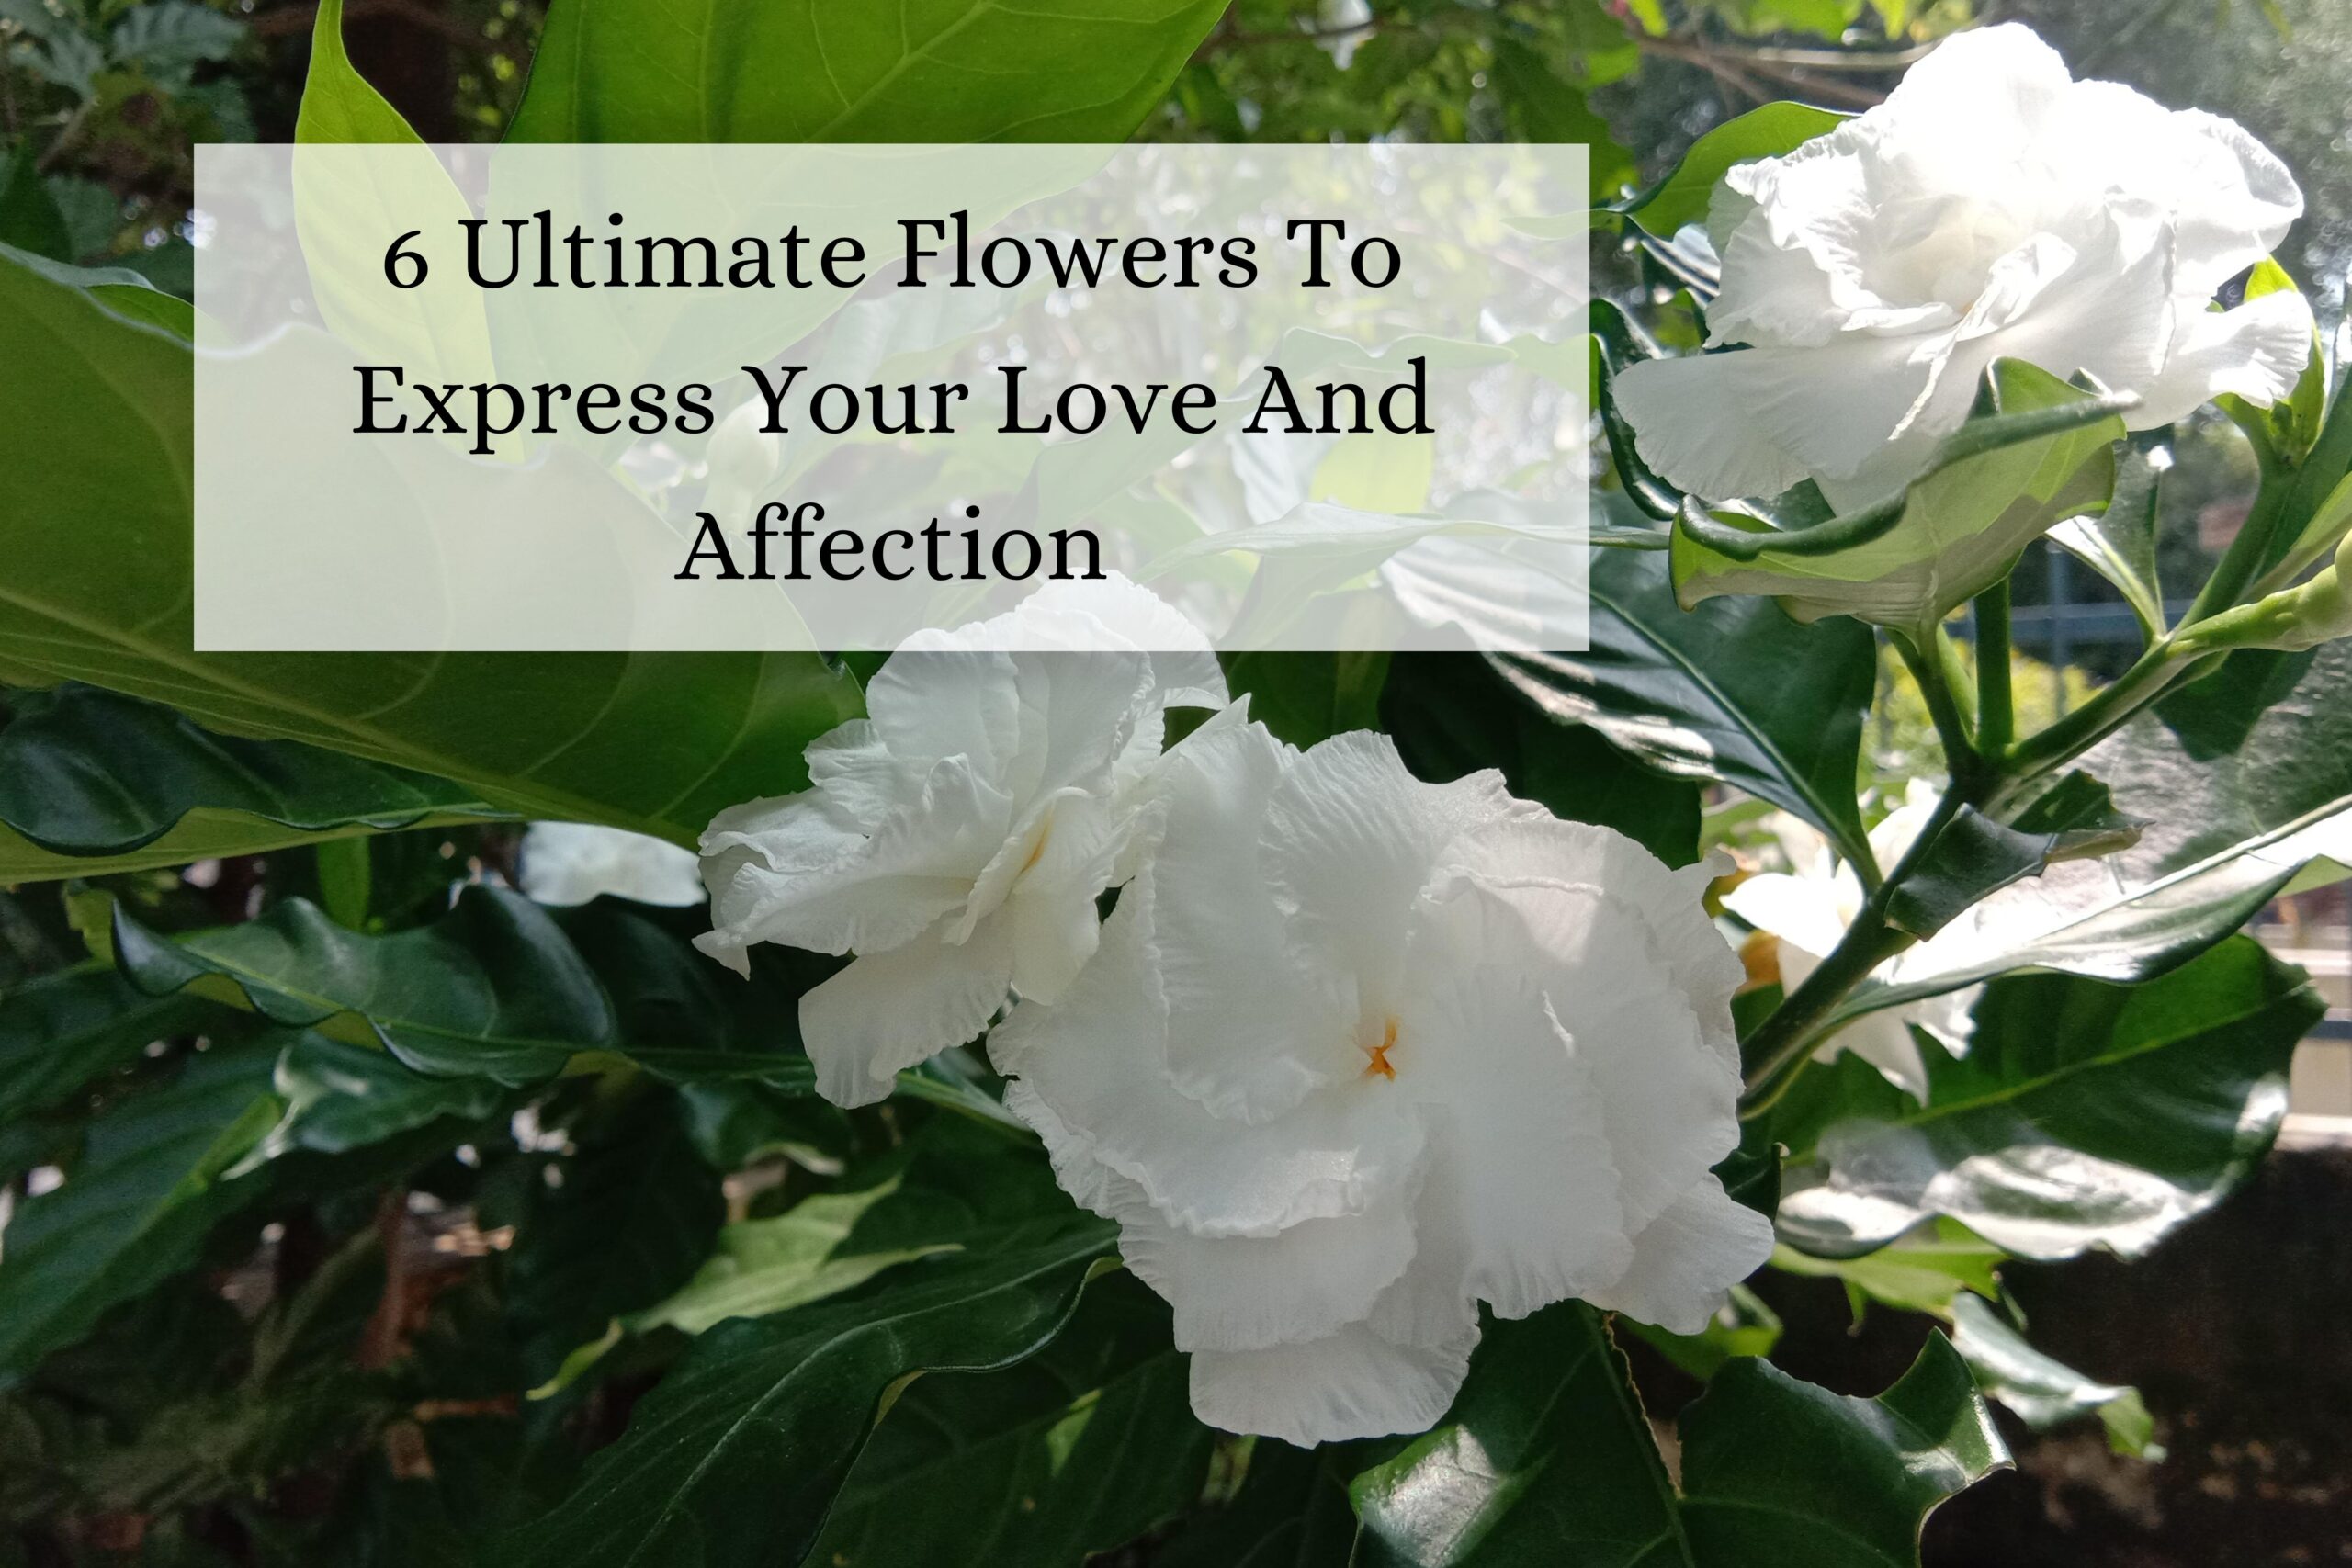 6 Ultimate Flowers To Express Your Love And Affection